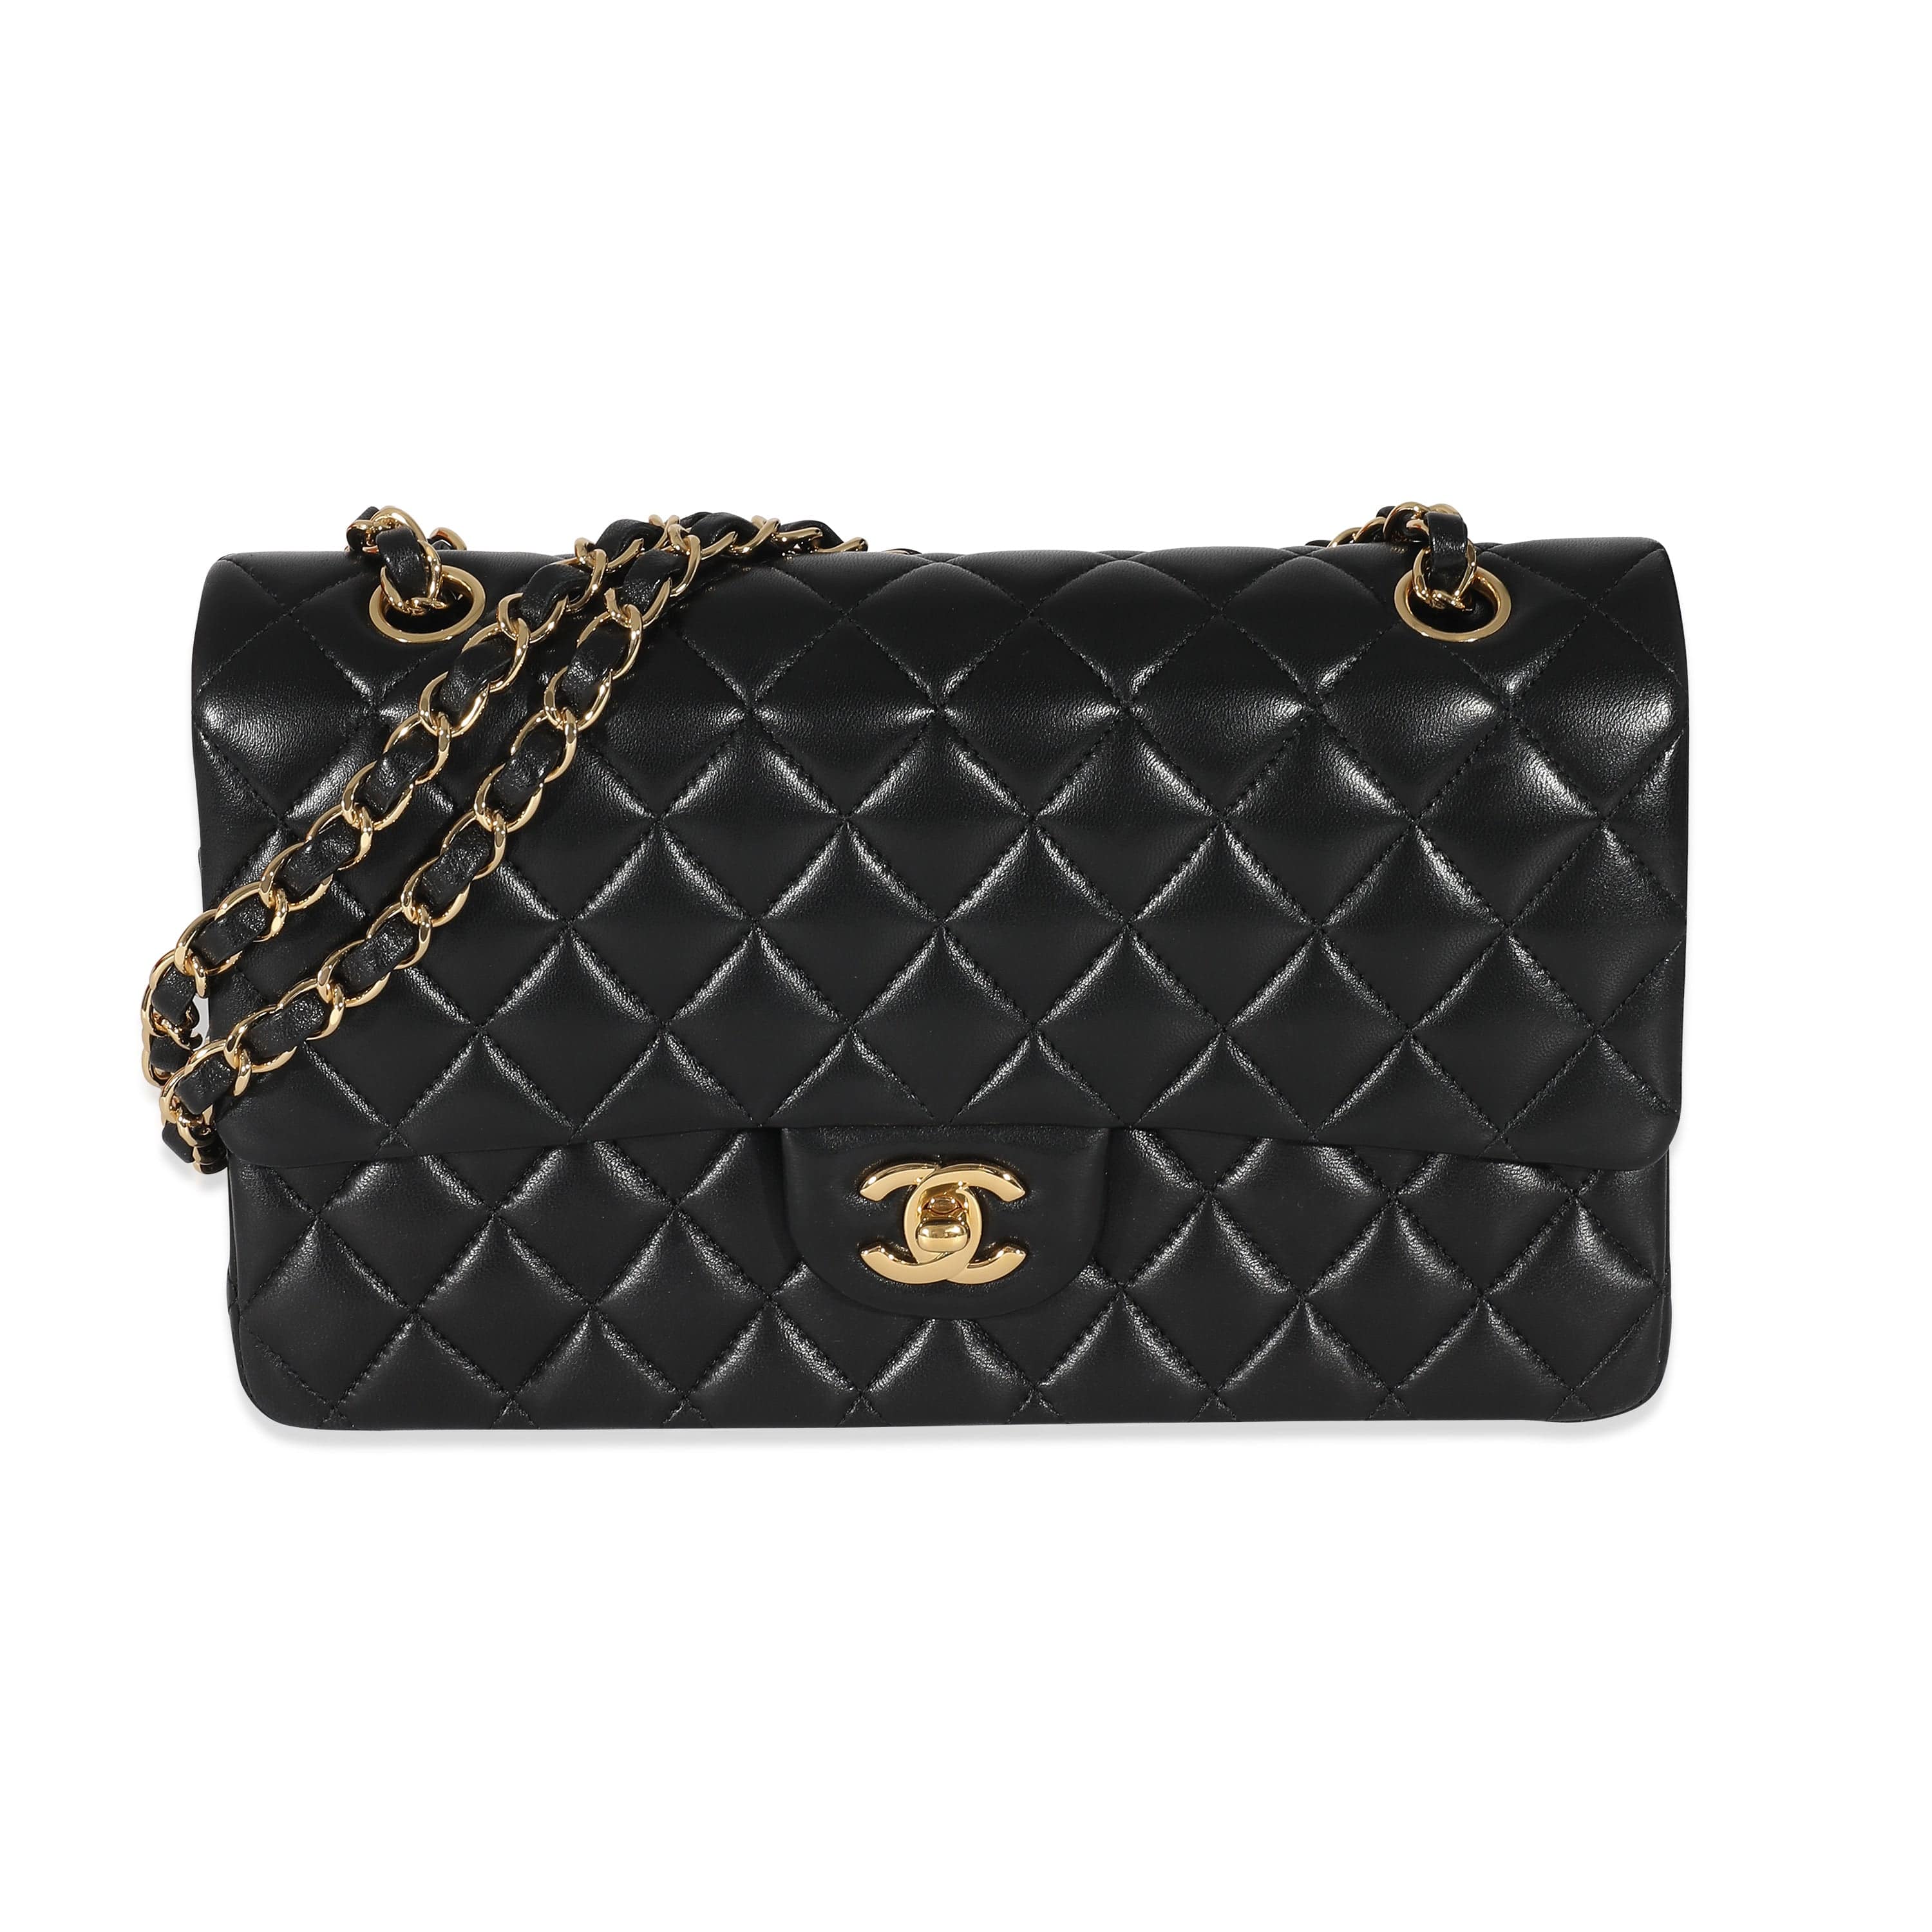 Chanel Chanel Black Quilted Lambskin Medium Classic Double Flap Bag